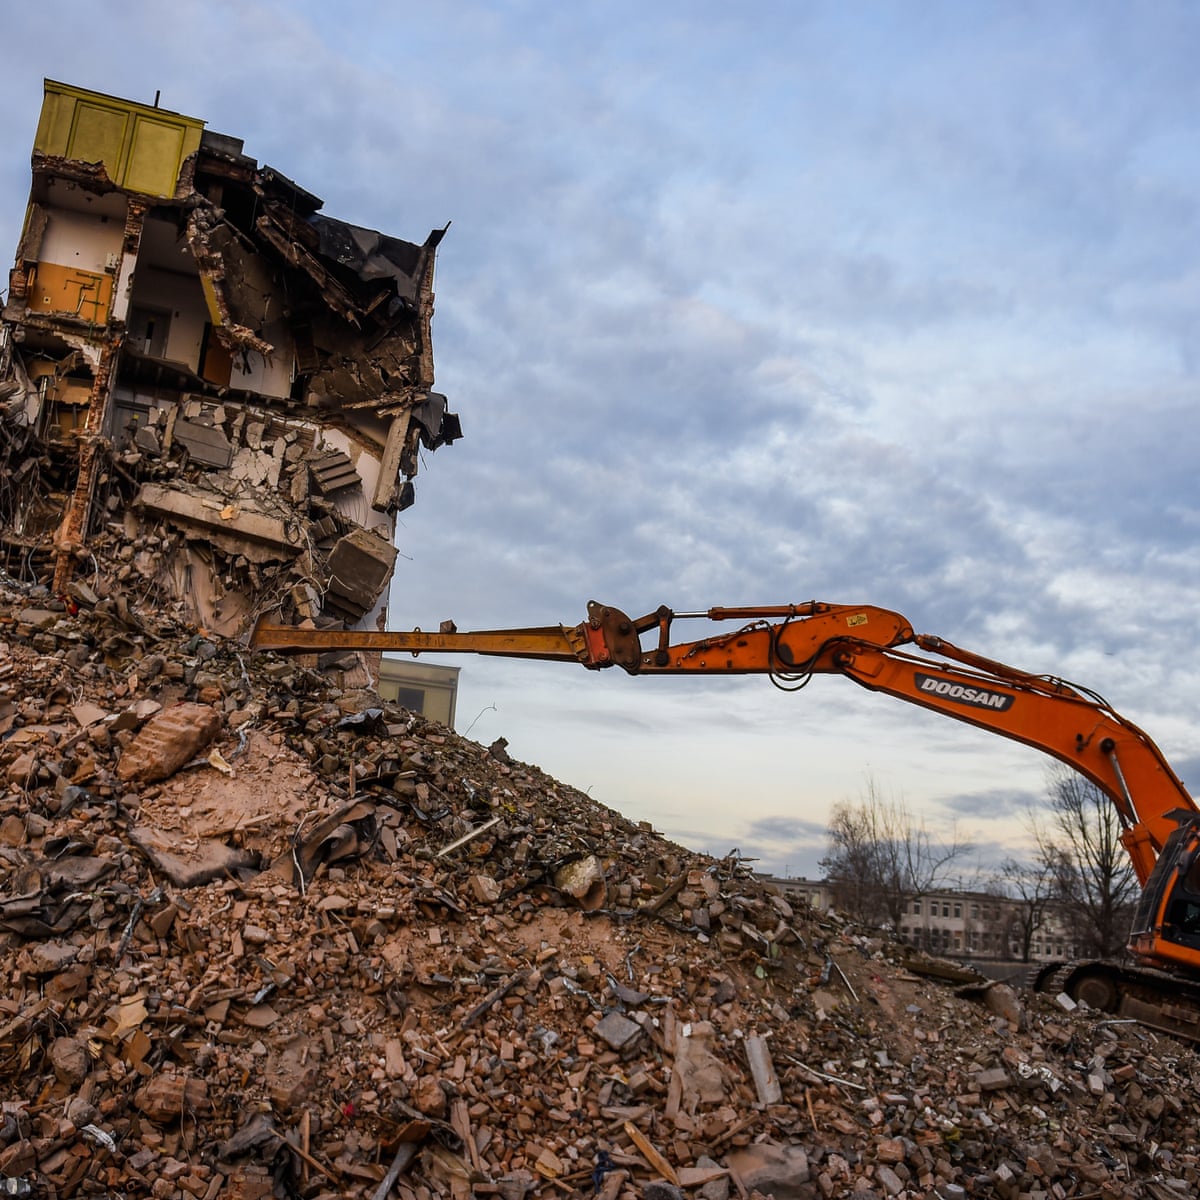 Removal of Hazardous Building Components from Demolition